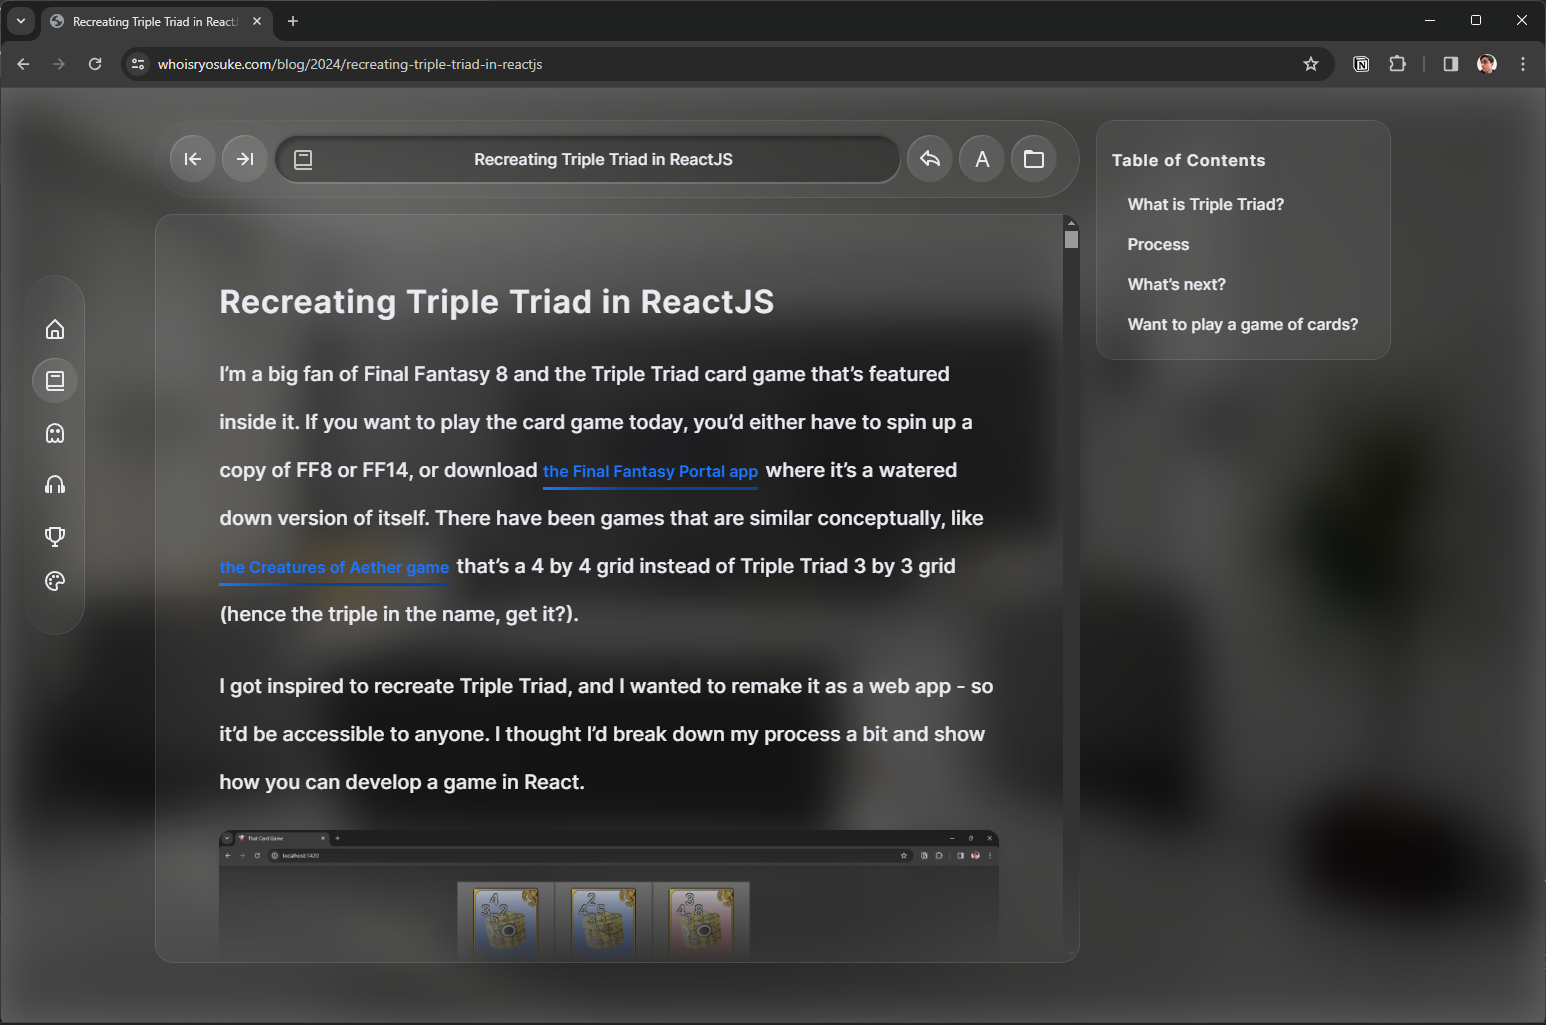 Screenshot of the blog. The blog content is inside a Vision Pro Safari app inspired layout. 